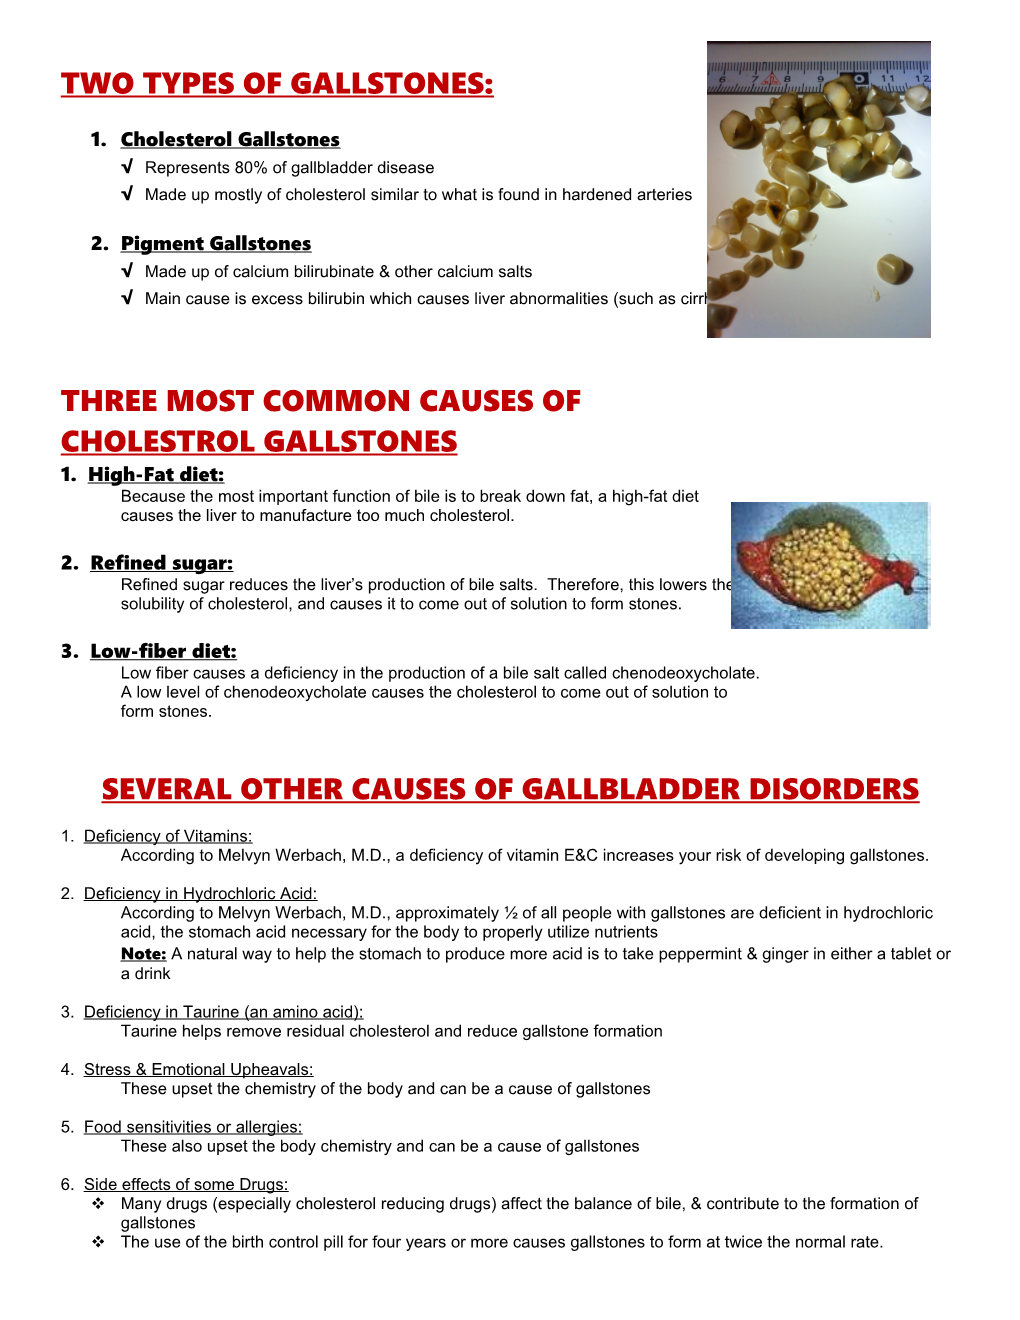 Two Types of Gallstones